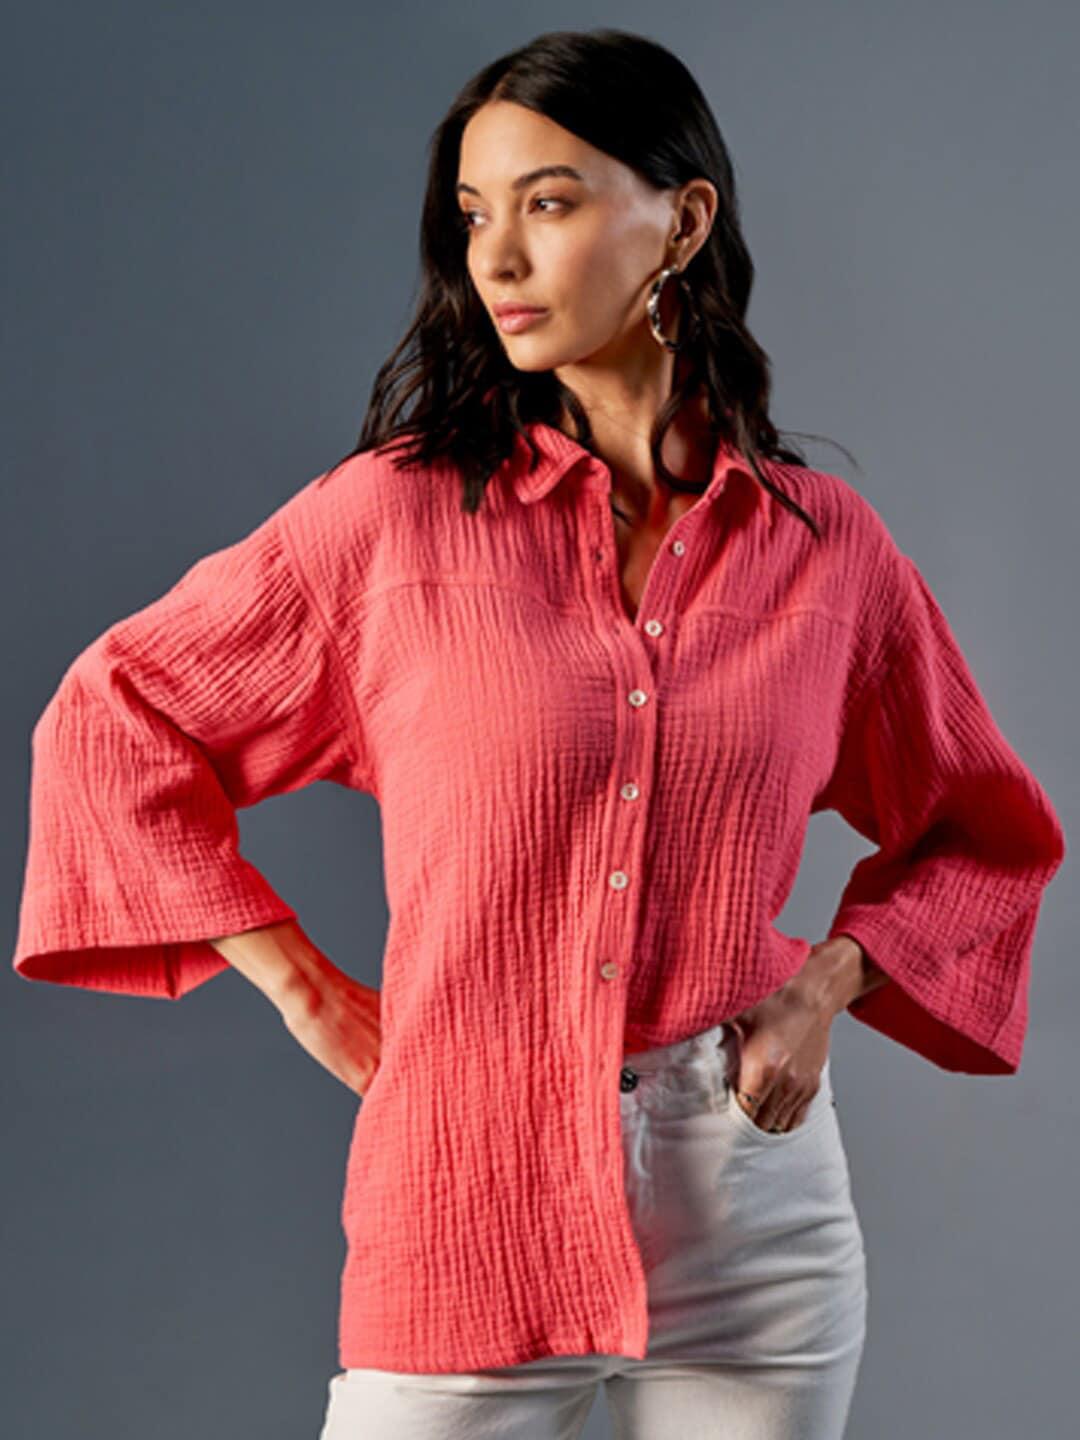 and-flared-sleeve-cotton-shirt-style-top